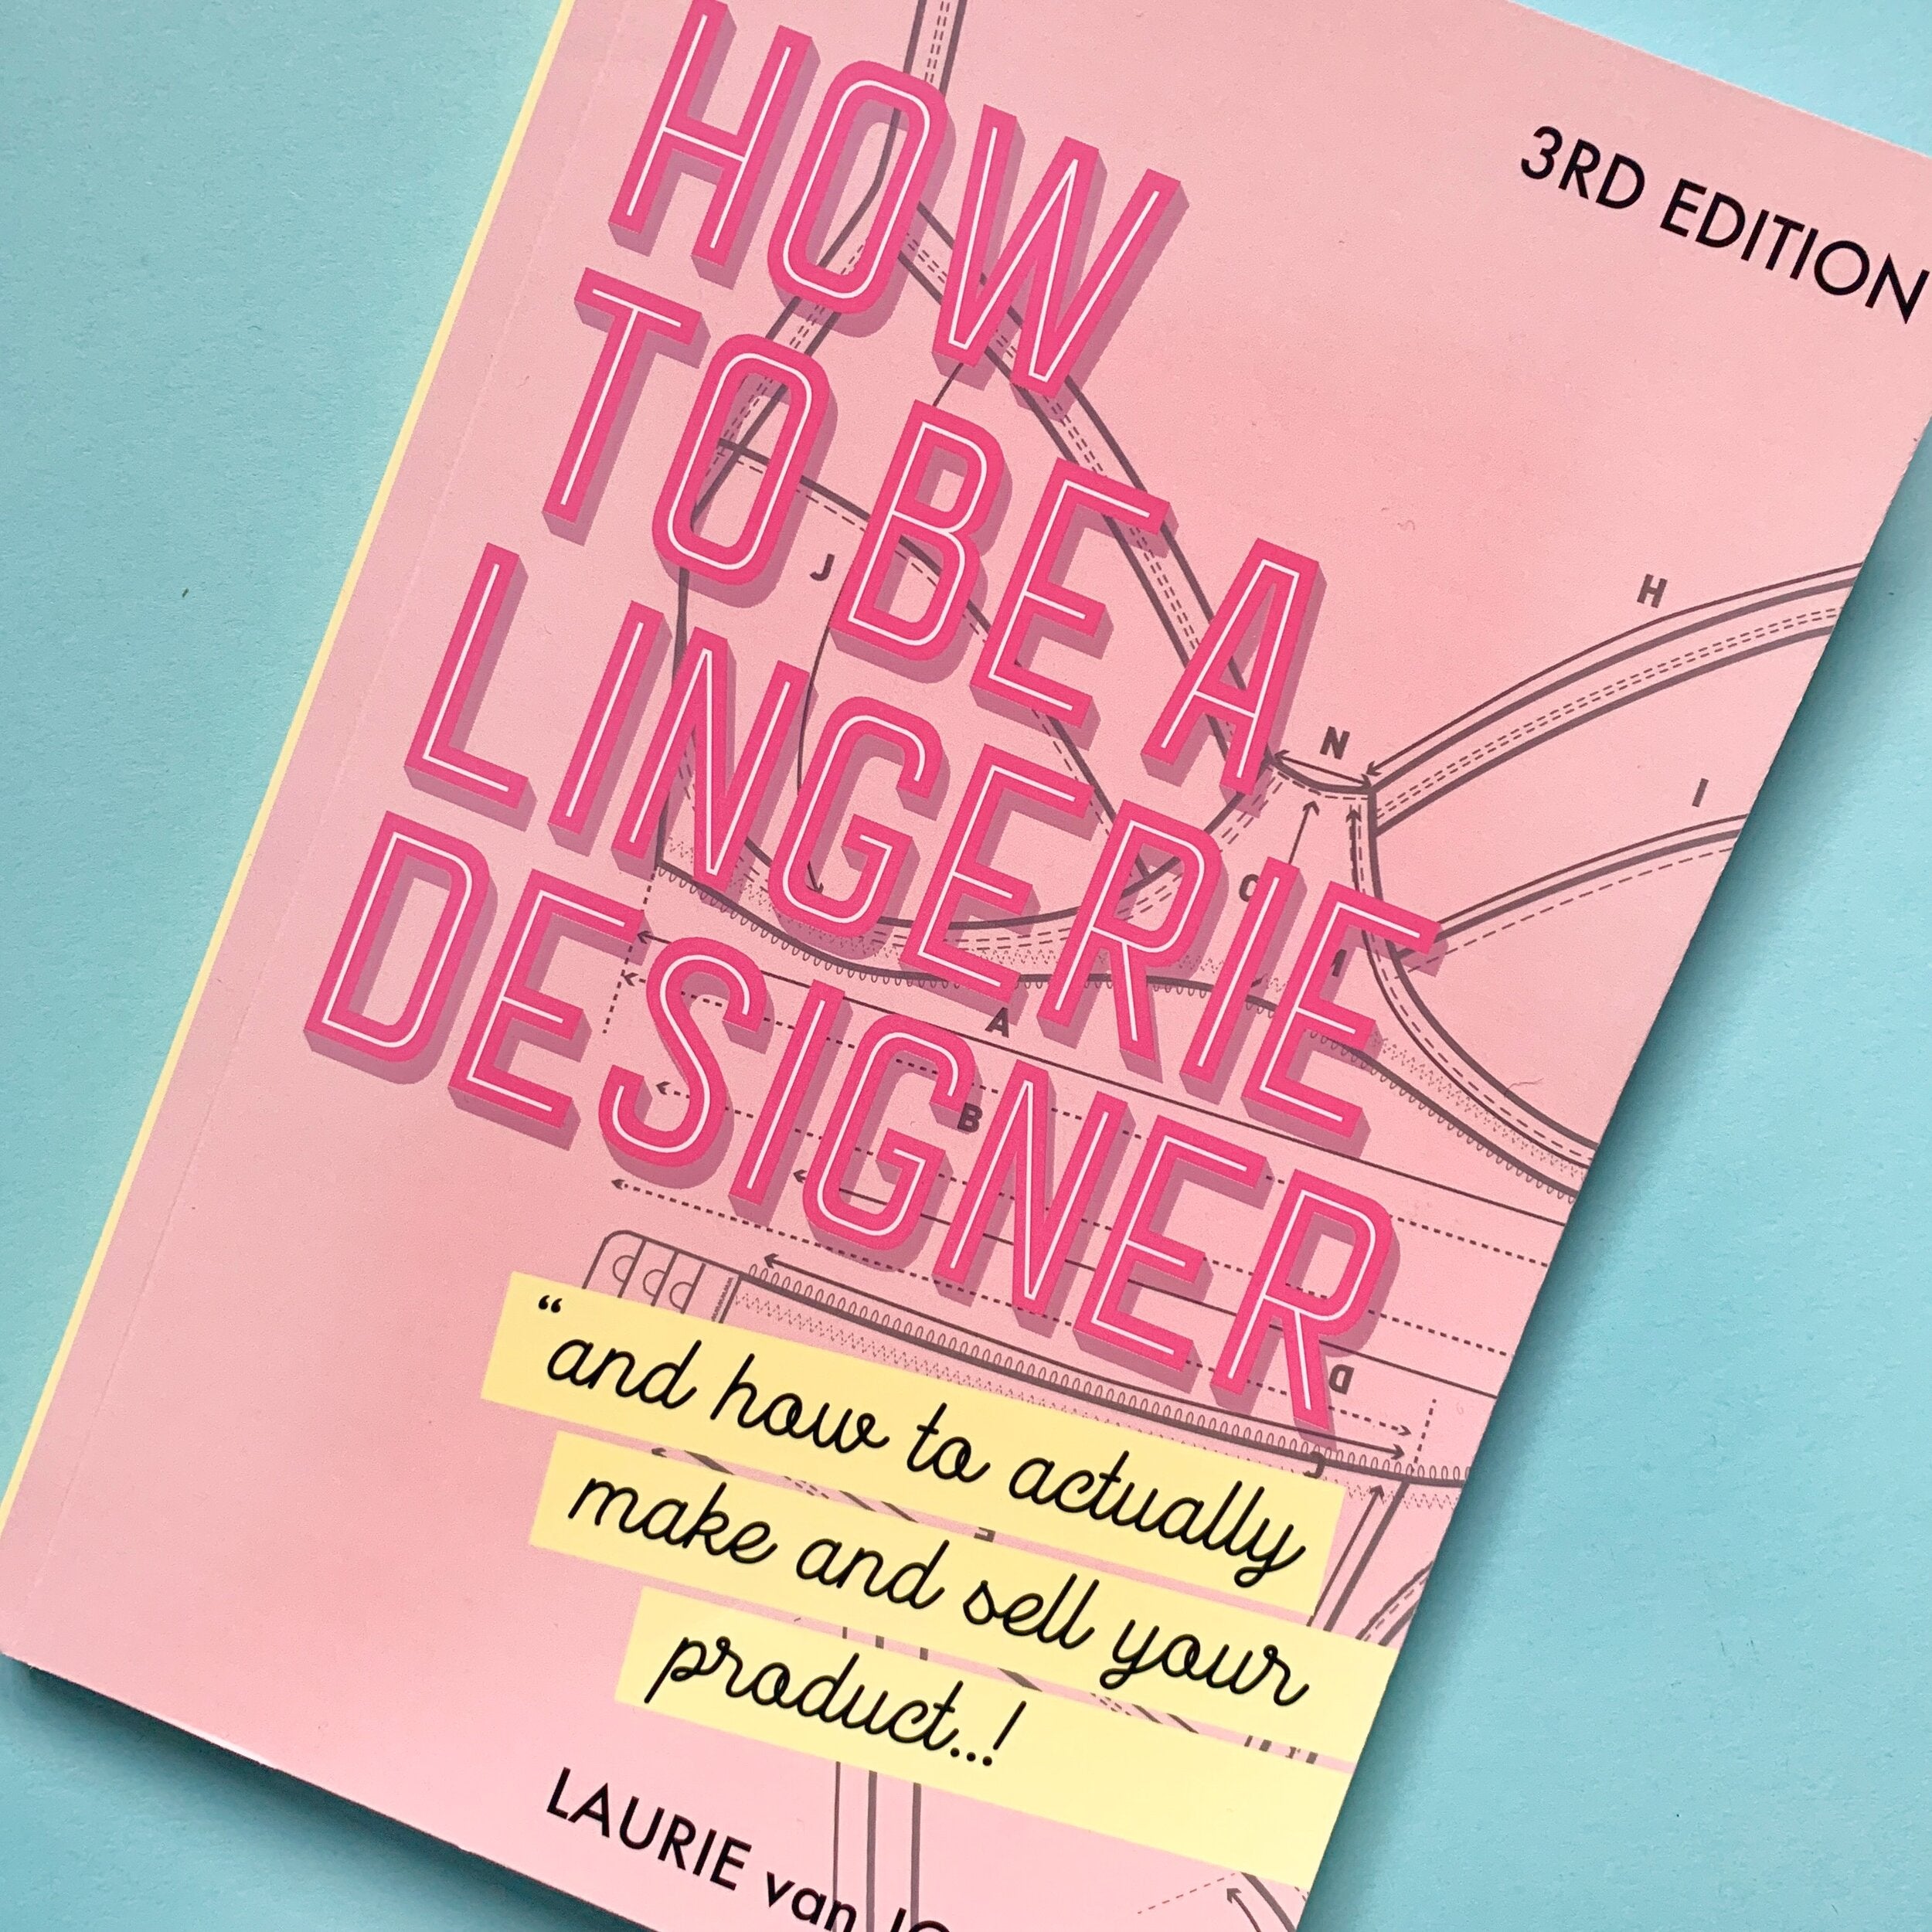 EBook: Van Jonsson Design- HOW TO BE A LINGERIE DESIGNER (and how to actually make and sell your product)